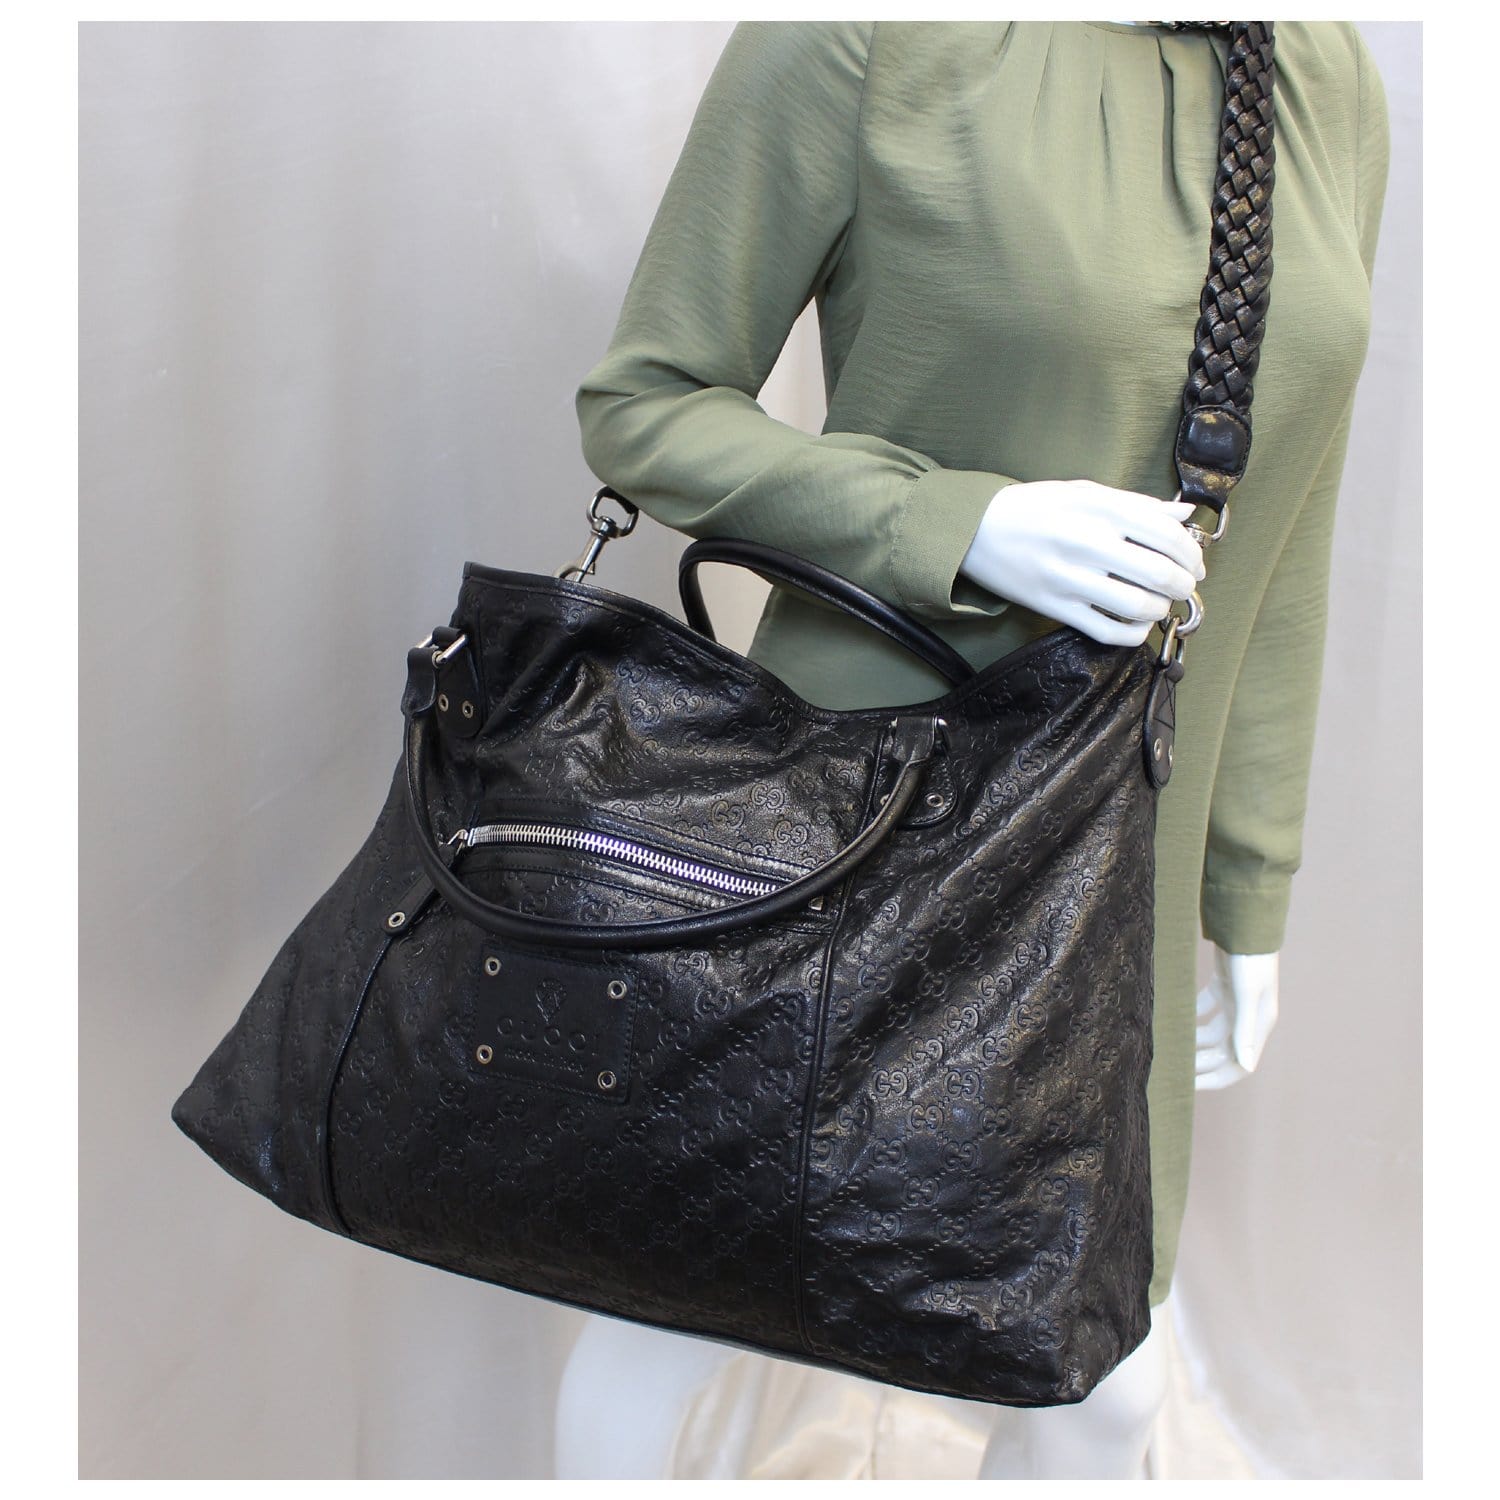 Gucci Deco large tote bag in black leather